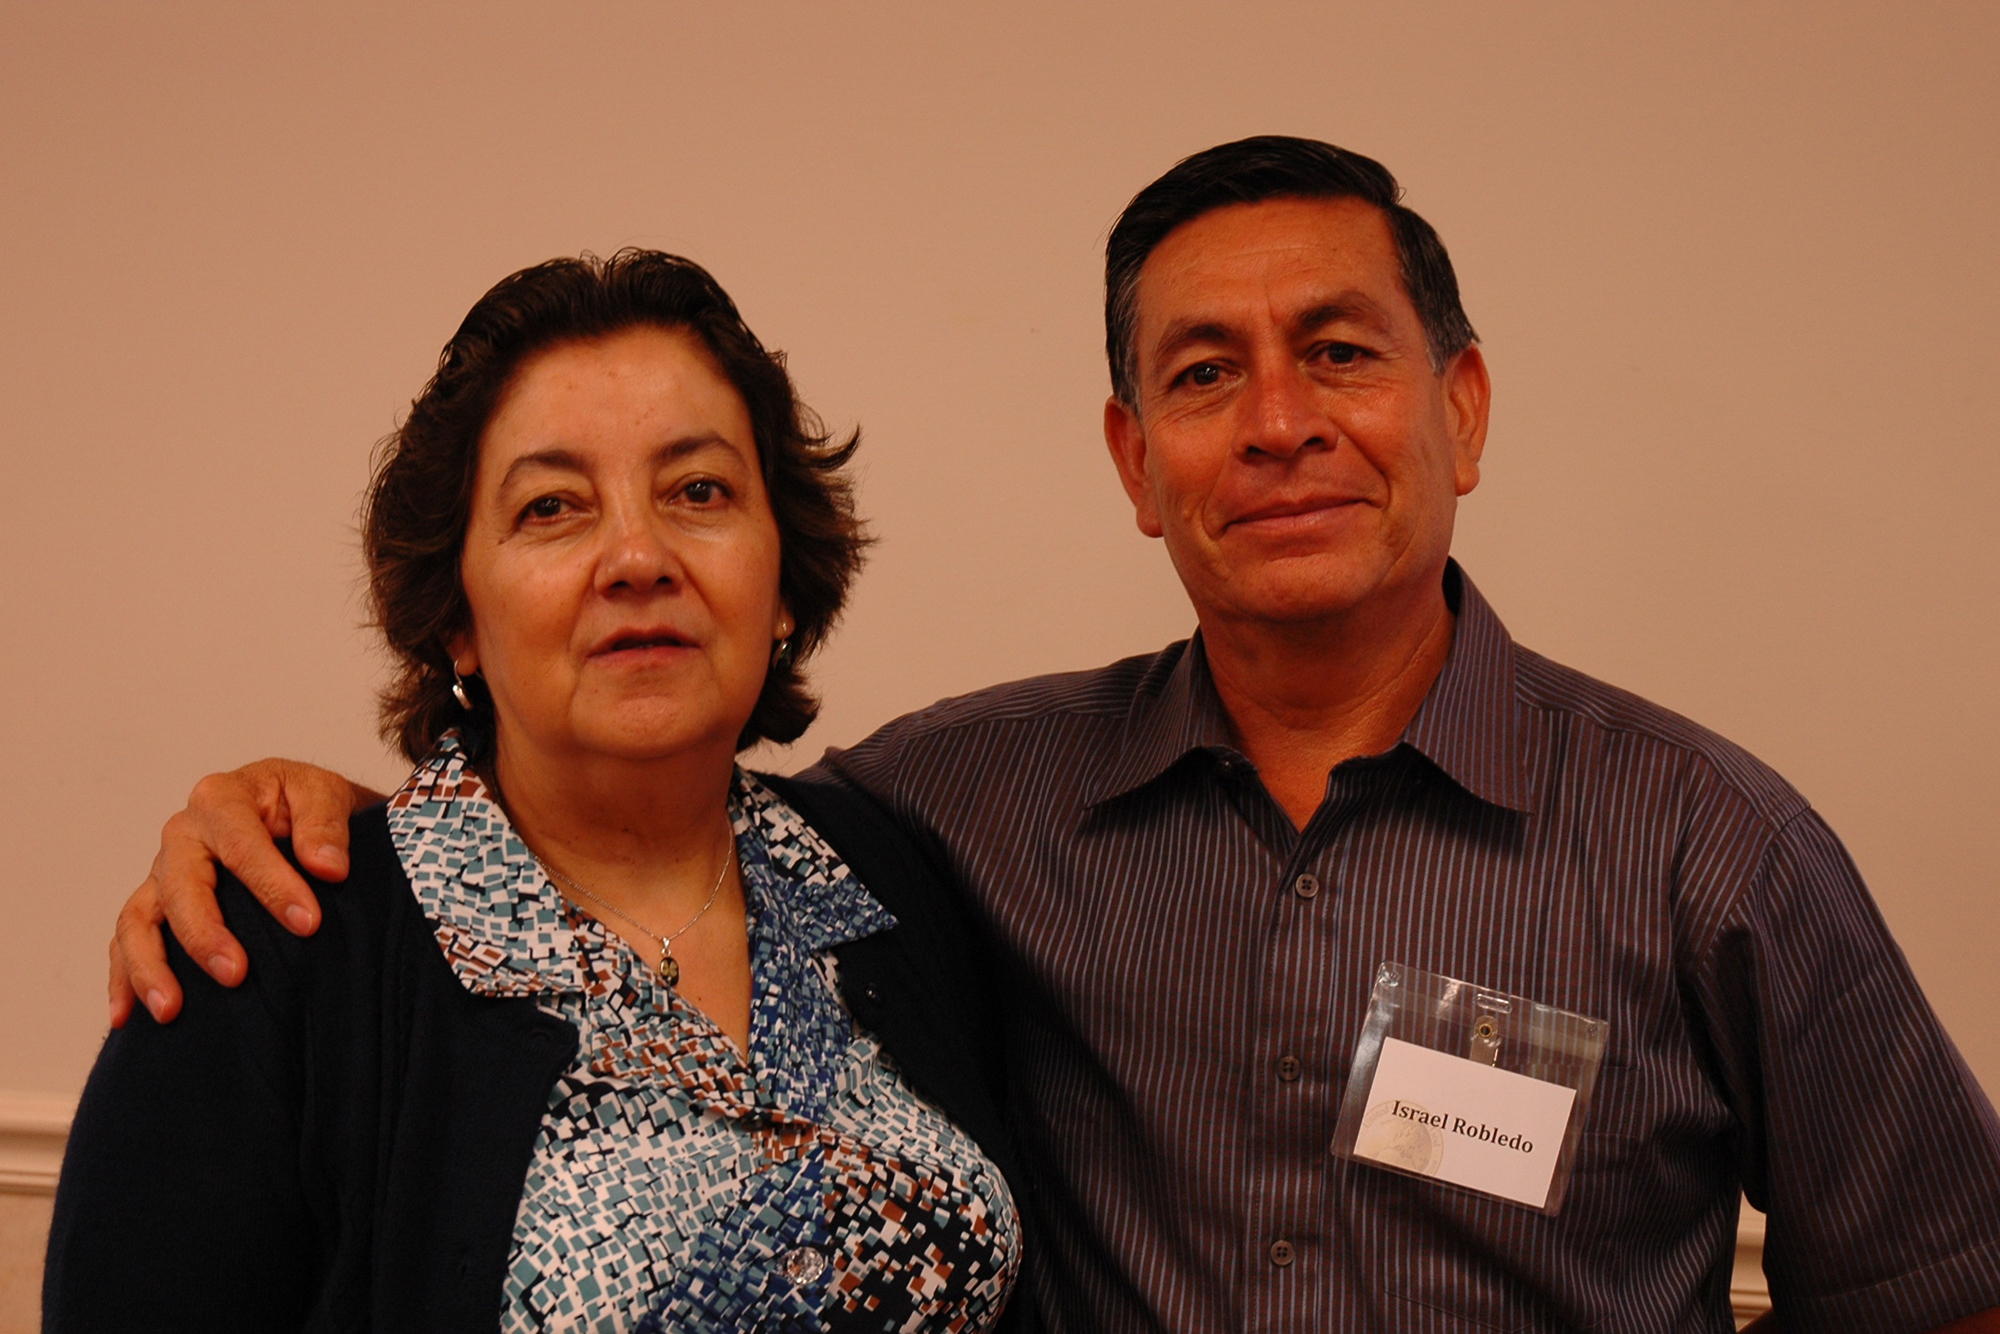 Israel and Thelma Robledo